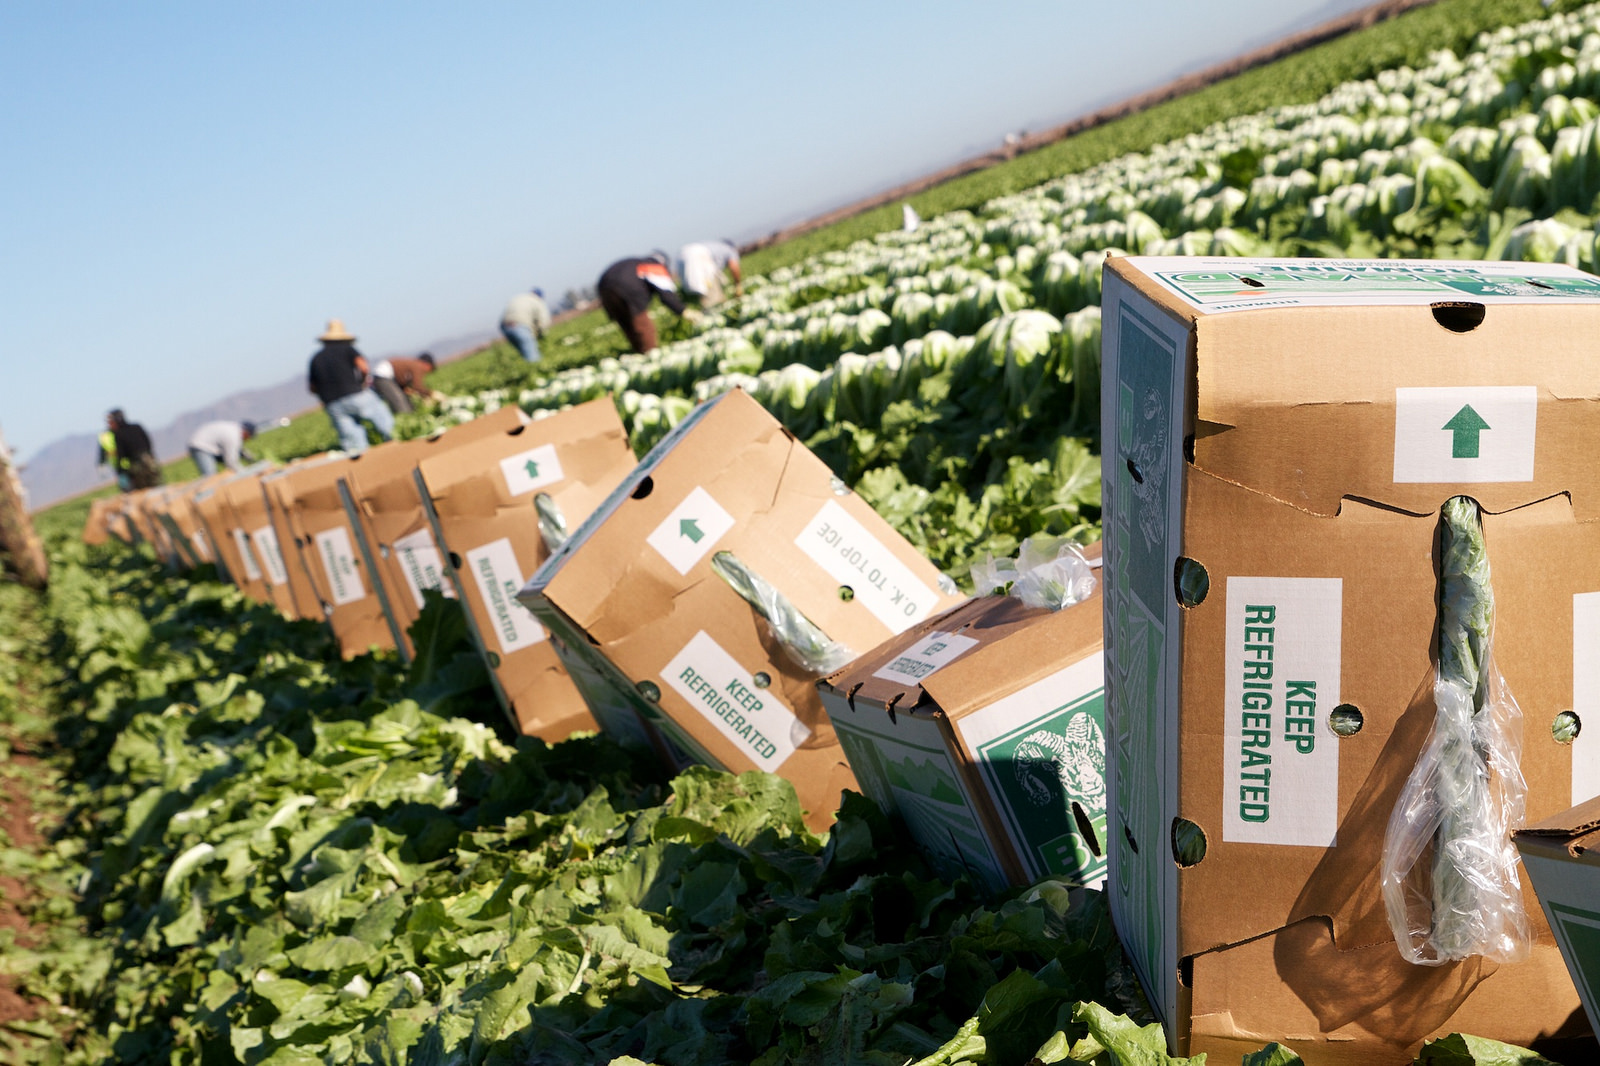 Lettuce fields in Yuma, Arizona. A new report from FDA links 2018's E. coli outbreak traced to romaine lettuce to a cattle CAFO nearby (August 2018)